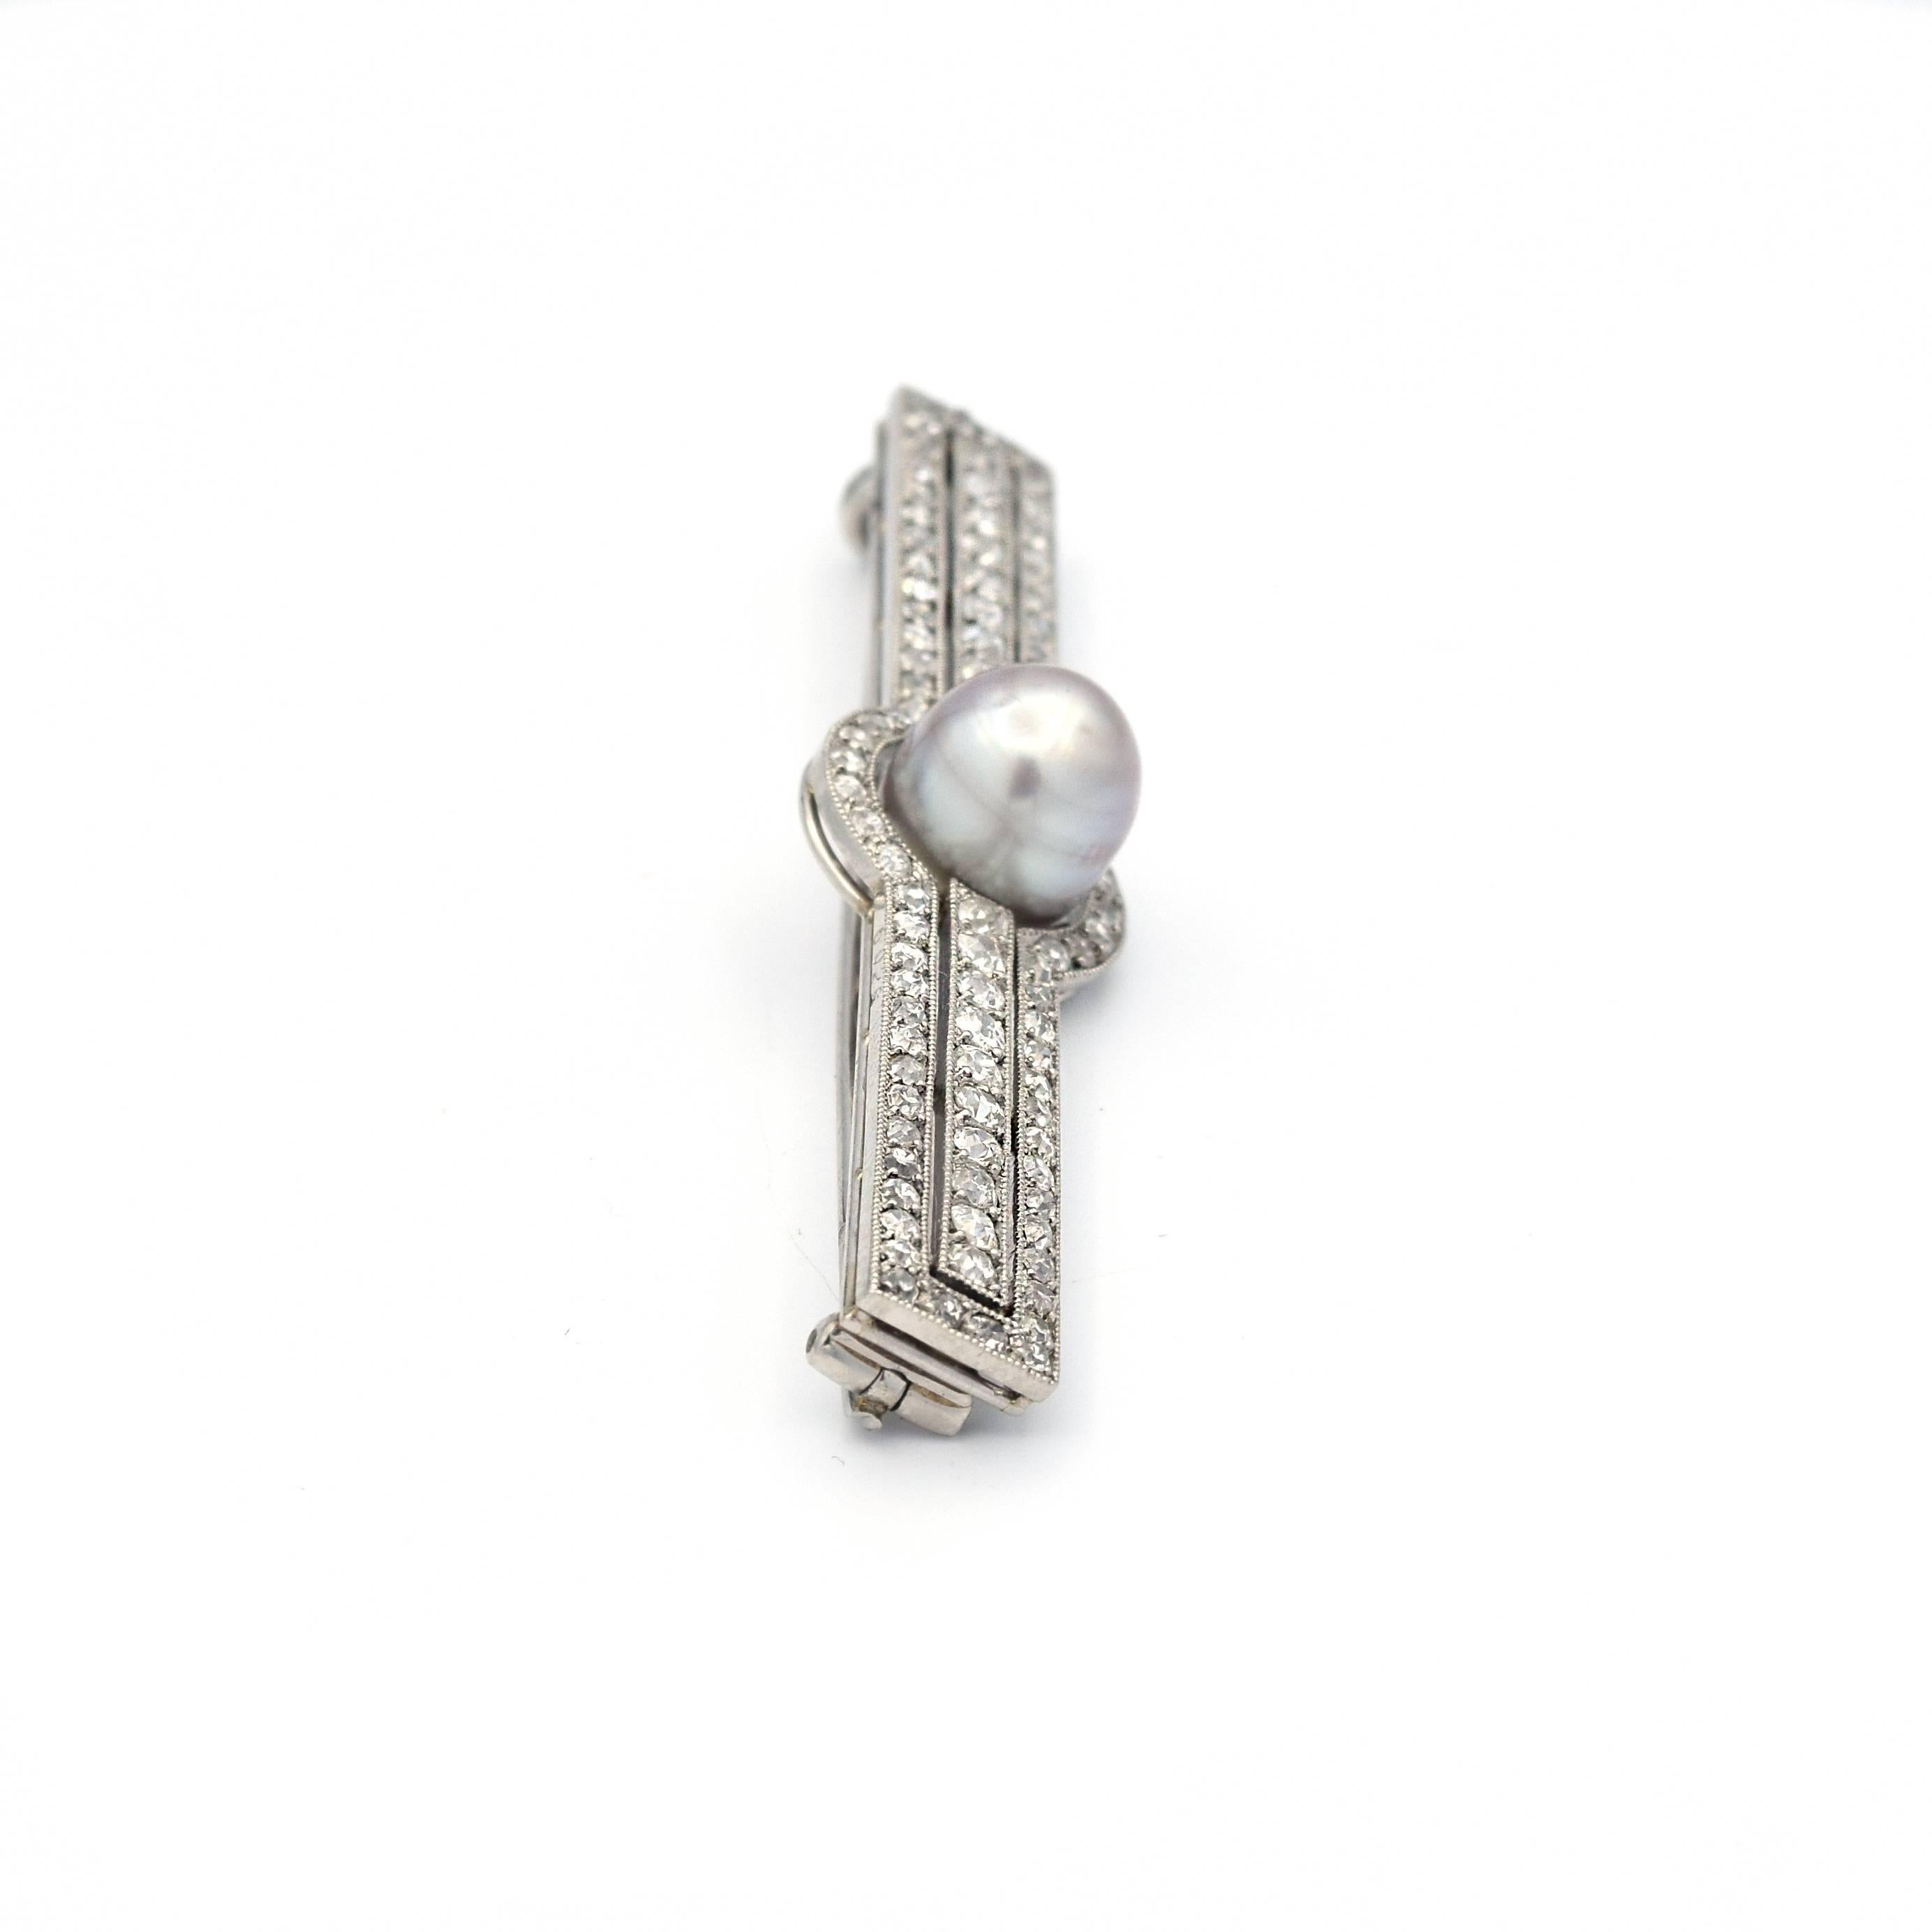 An Early 20th Century colored natural saltwater baroque pearl mounted with beautiful diamonds, by Cartier. 

Set to the front with a button-shaped grey natural pearl, measuring approximately 8.60-8.70x9.20 mm, to the old-cut diamond bar brooch,